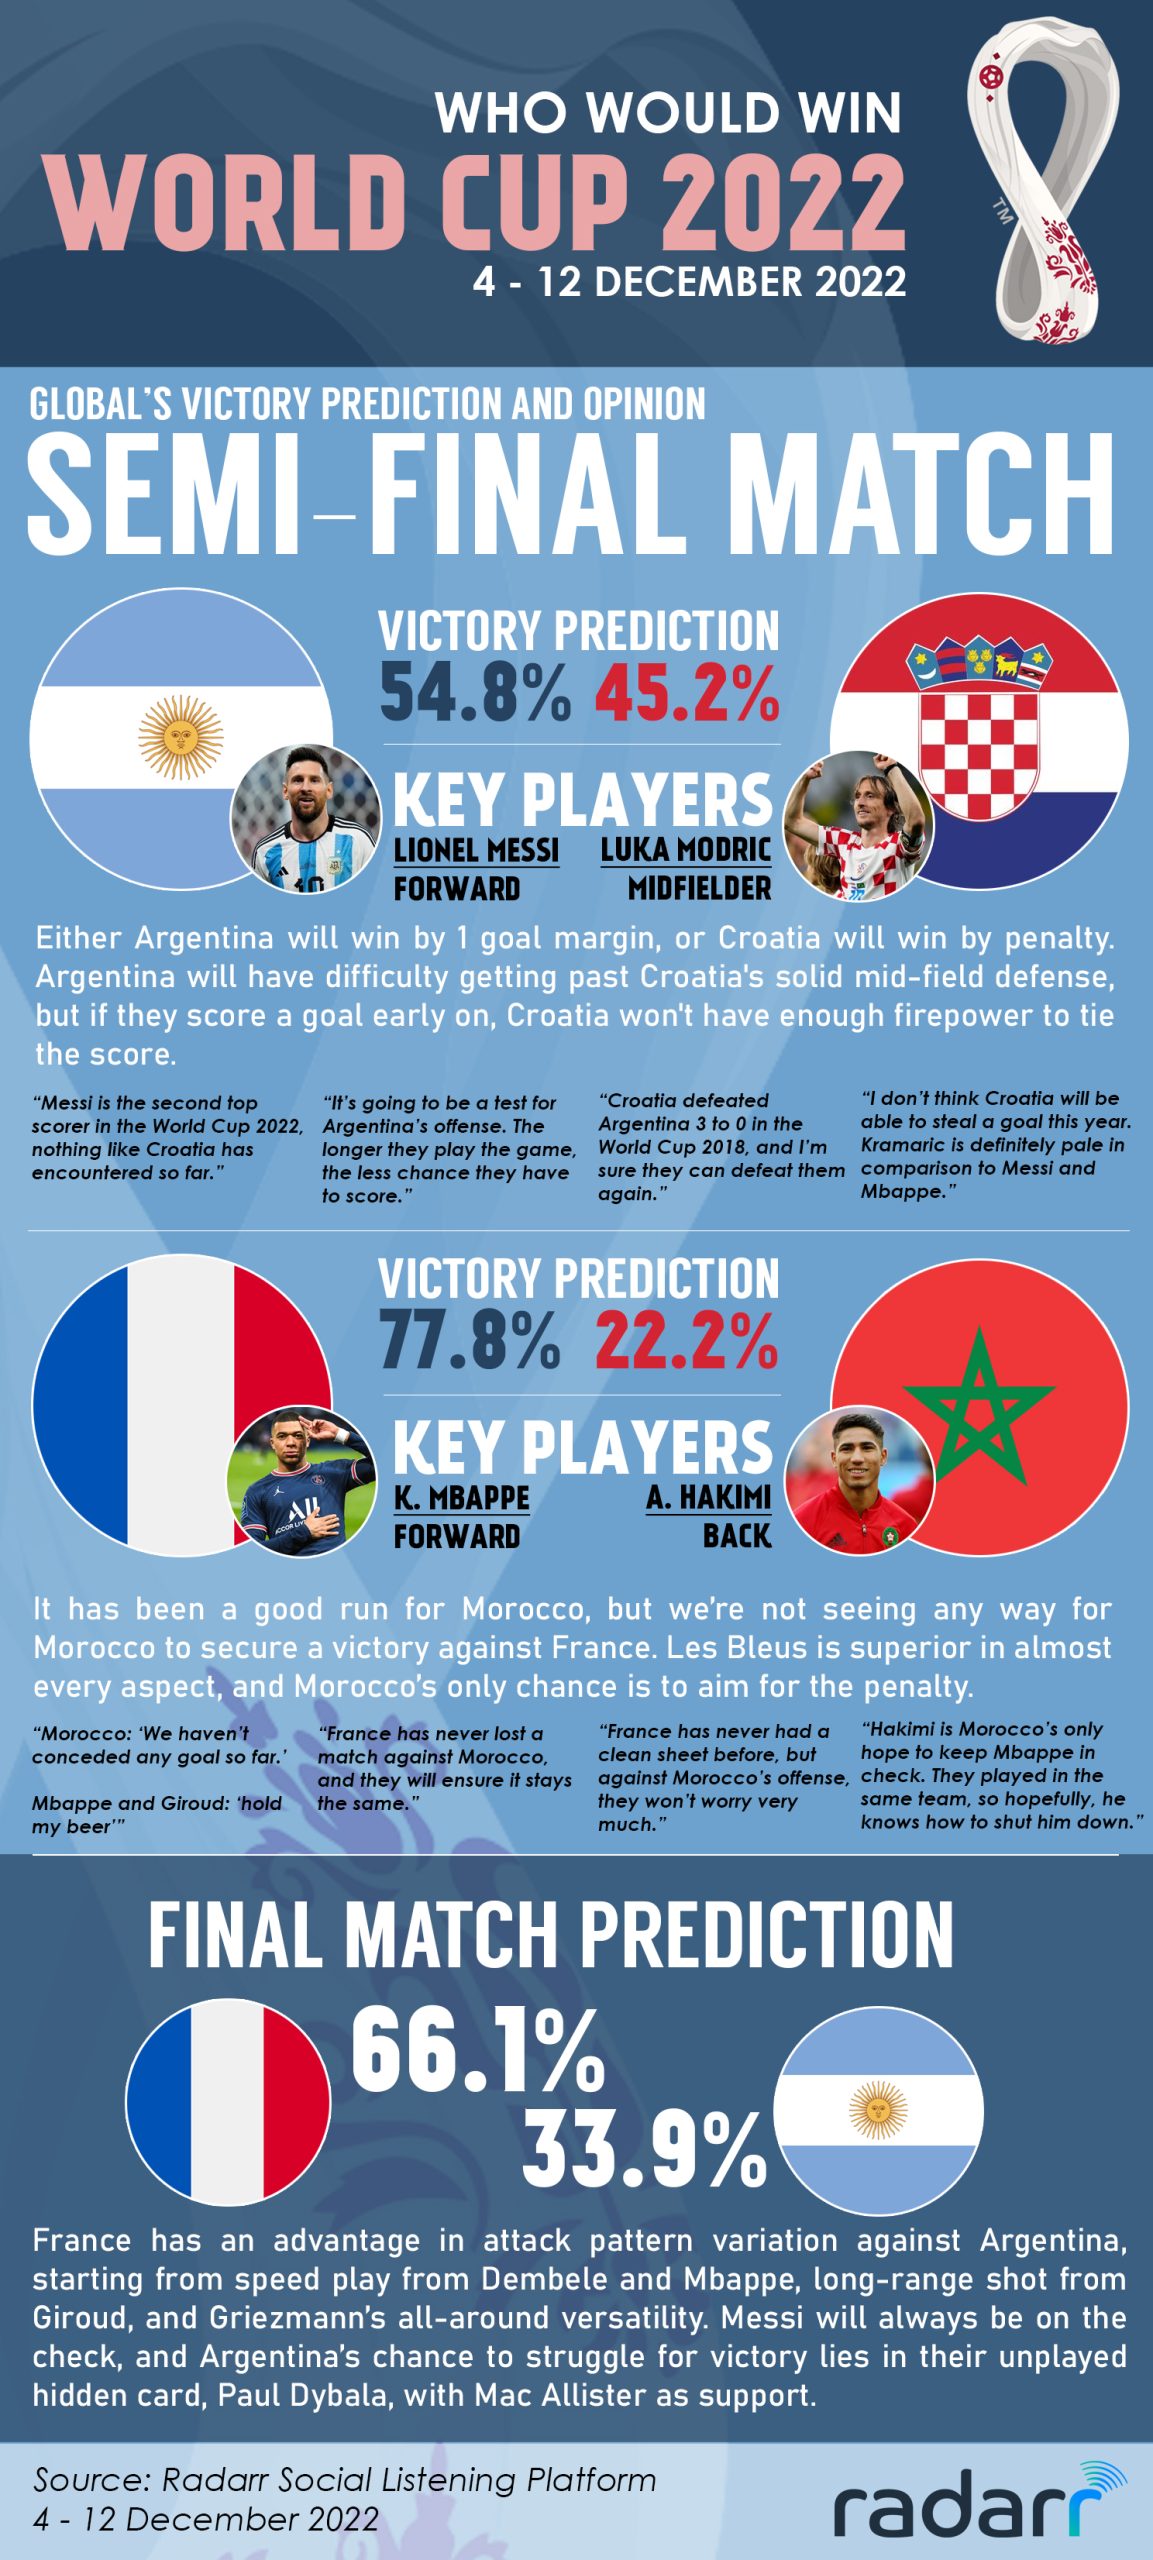 Who Would Win the World Cup 2022? Radarr’s Semi-Final and Final Predictions.
